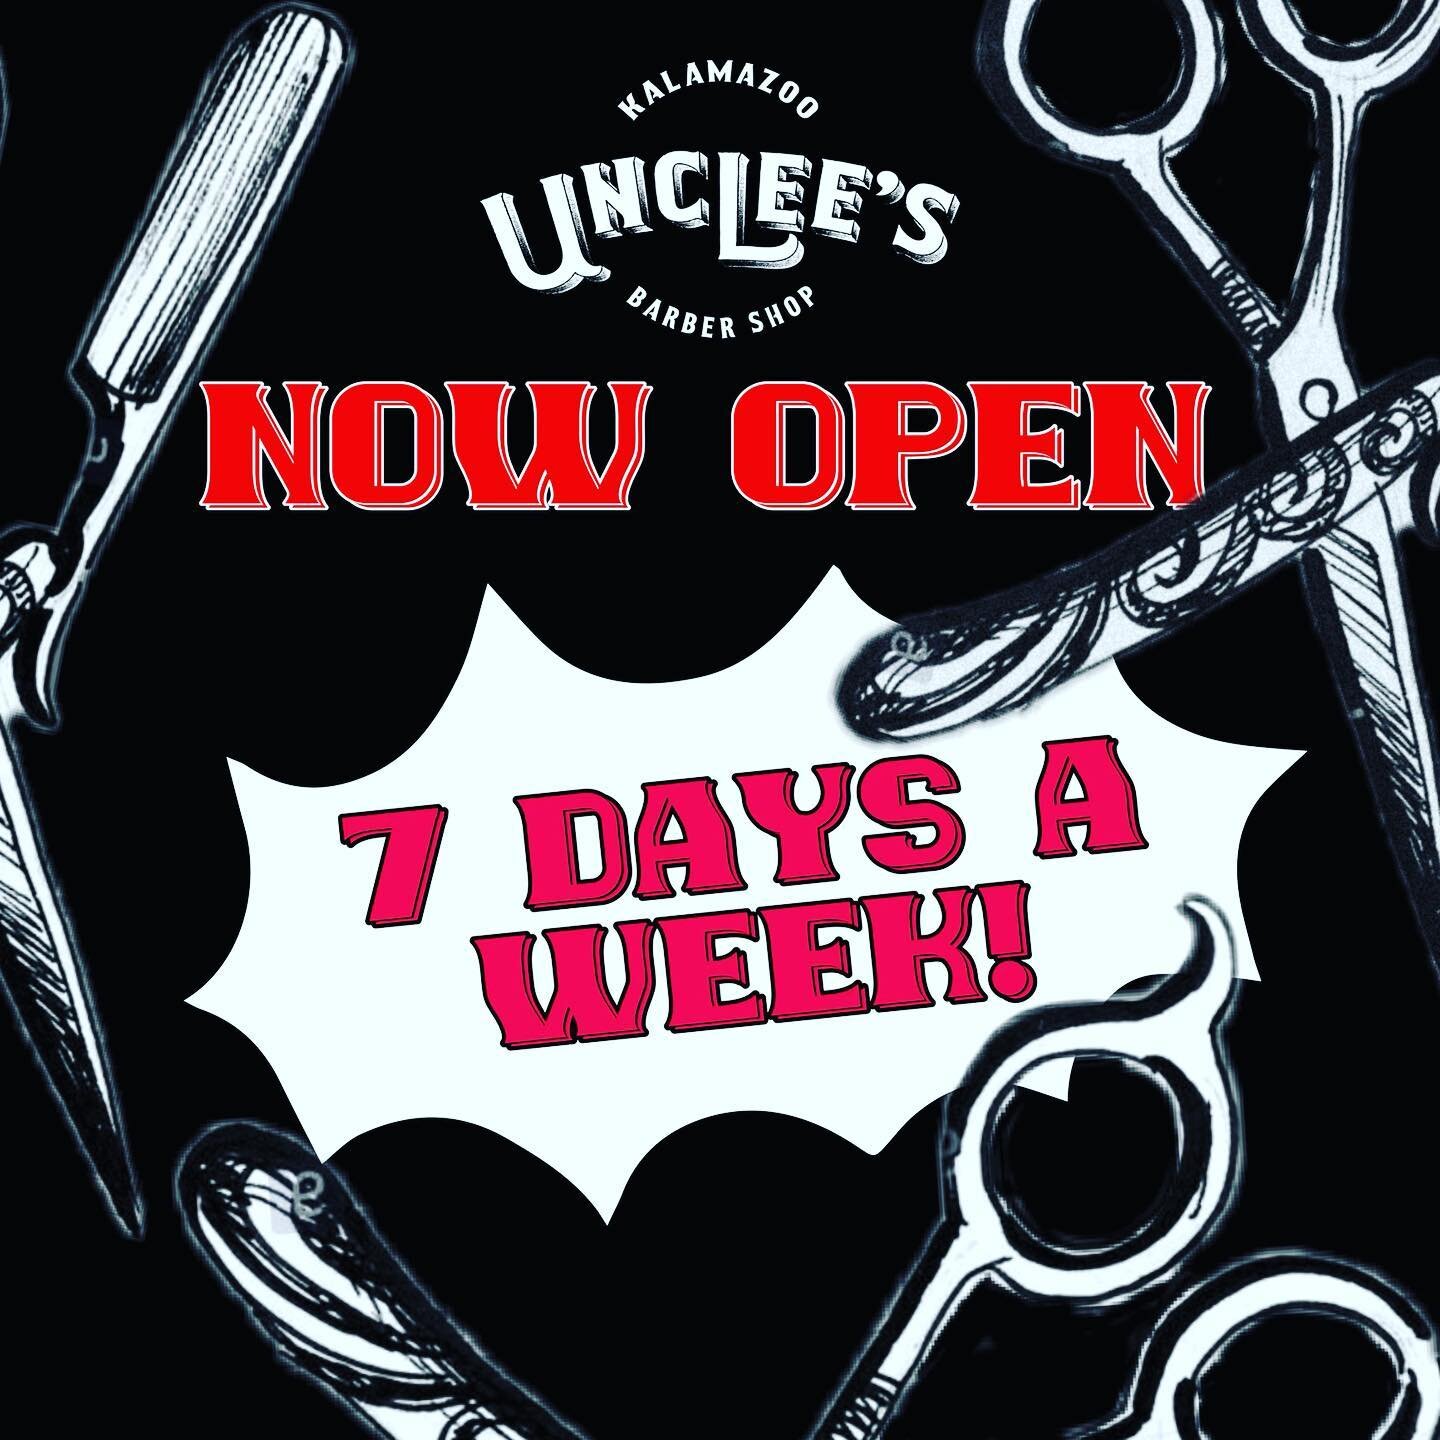 WE ARE NOW OPEN 7 days a WEEK!!